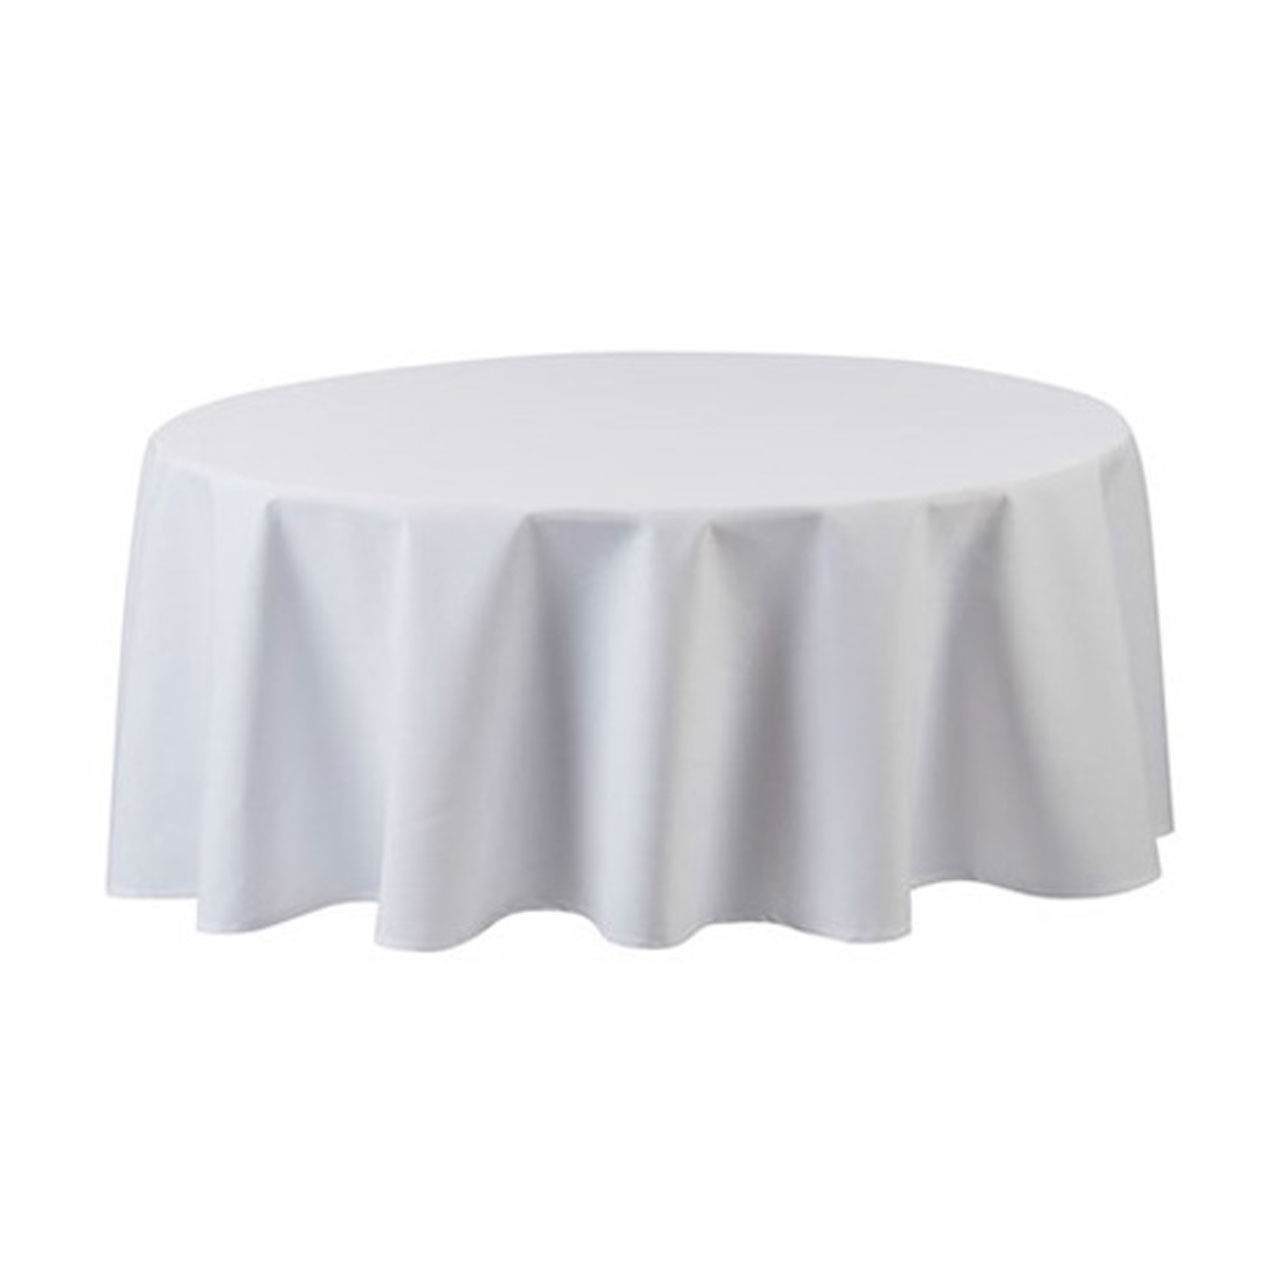 What technology is used in the Seamless White 120" Rounds Tablecloth?